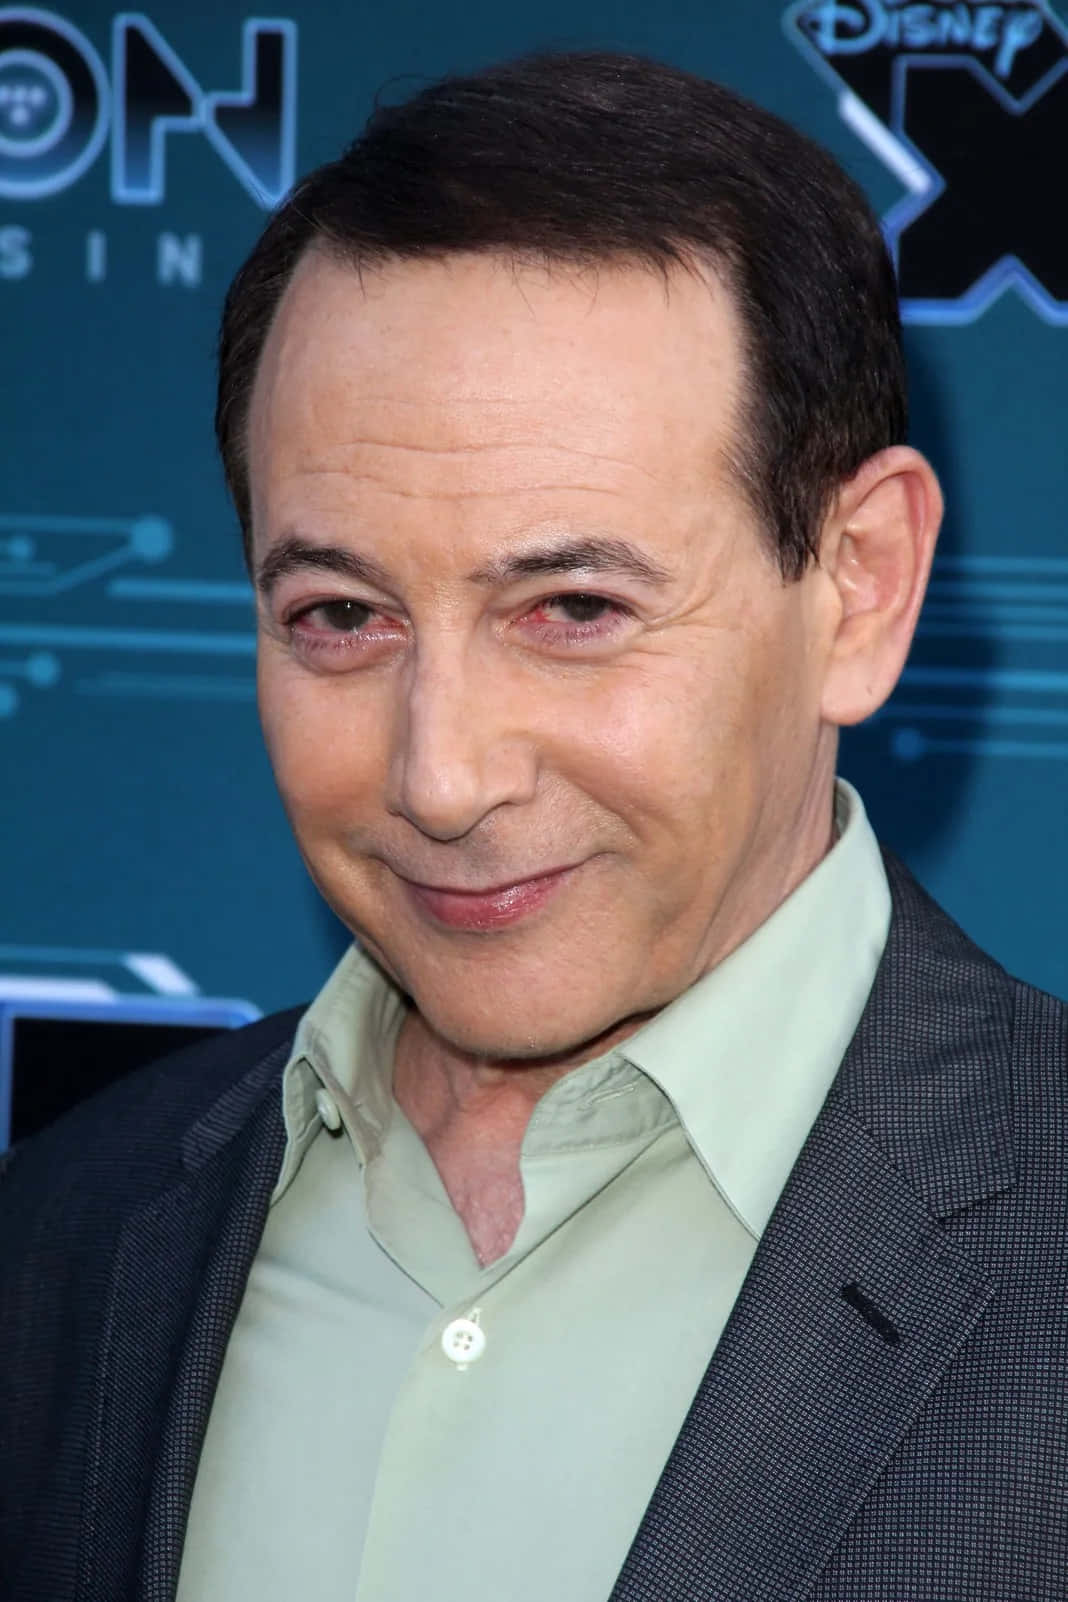 Hollywood icon Paul Reubens in the classic role of Pee-Wee Herman. Wallpaper